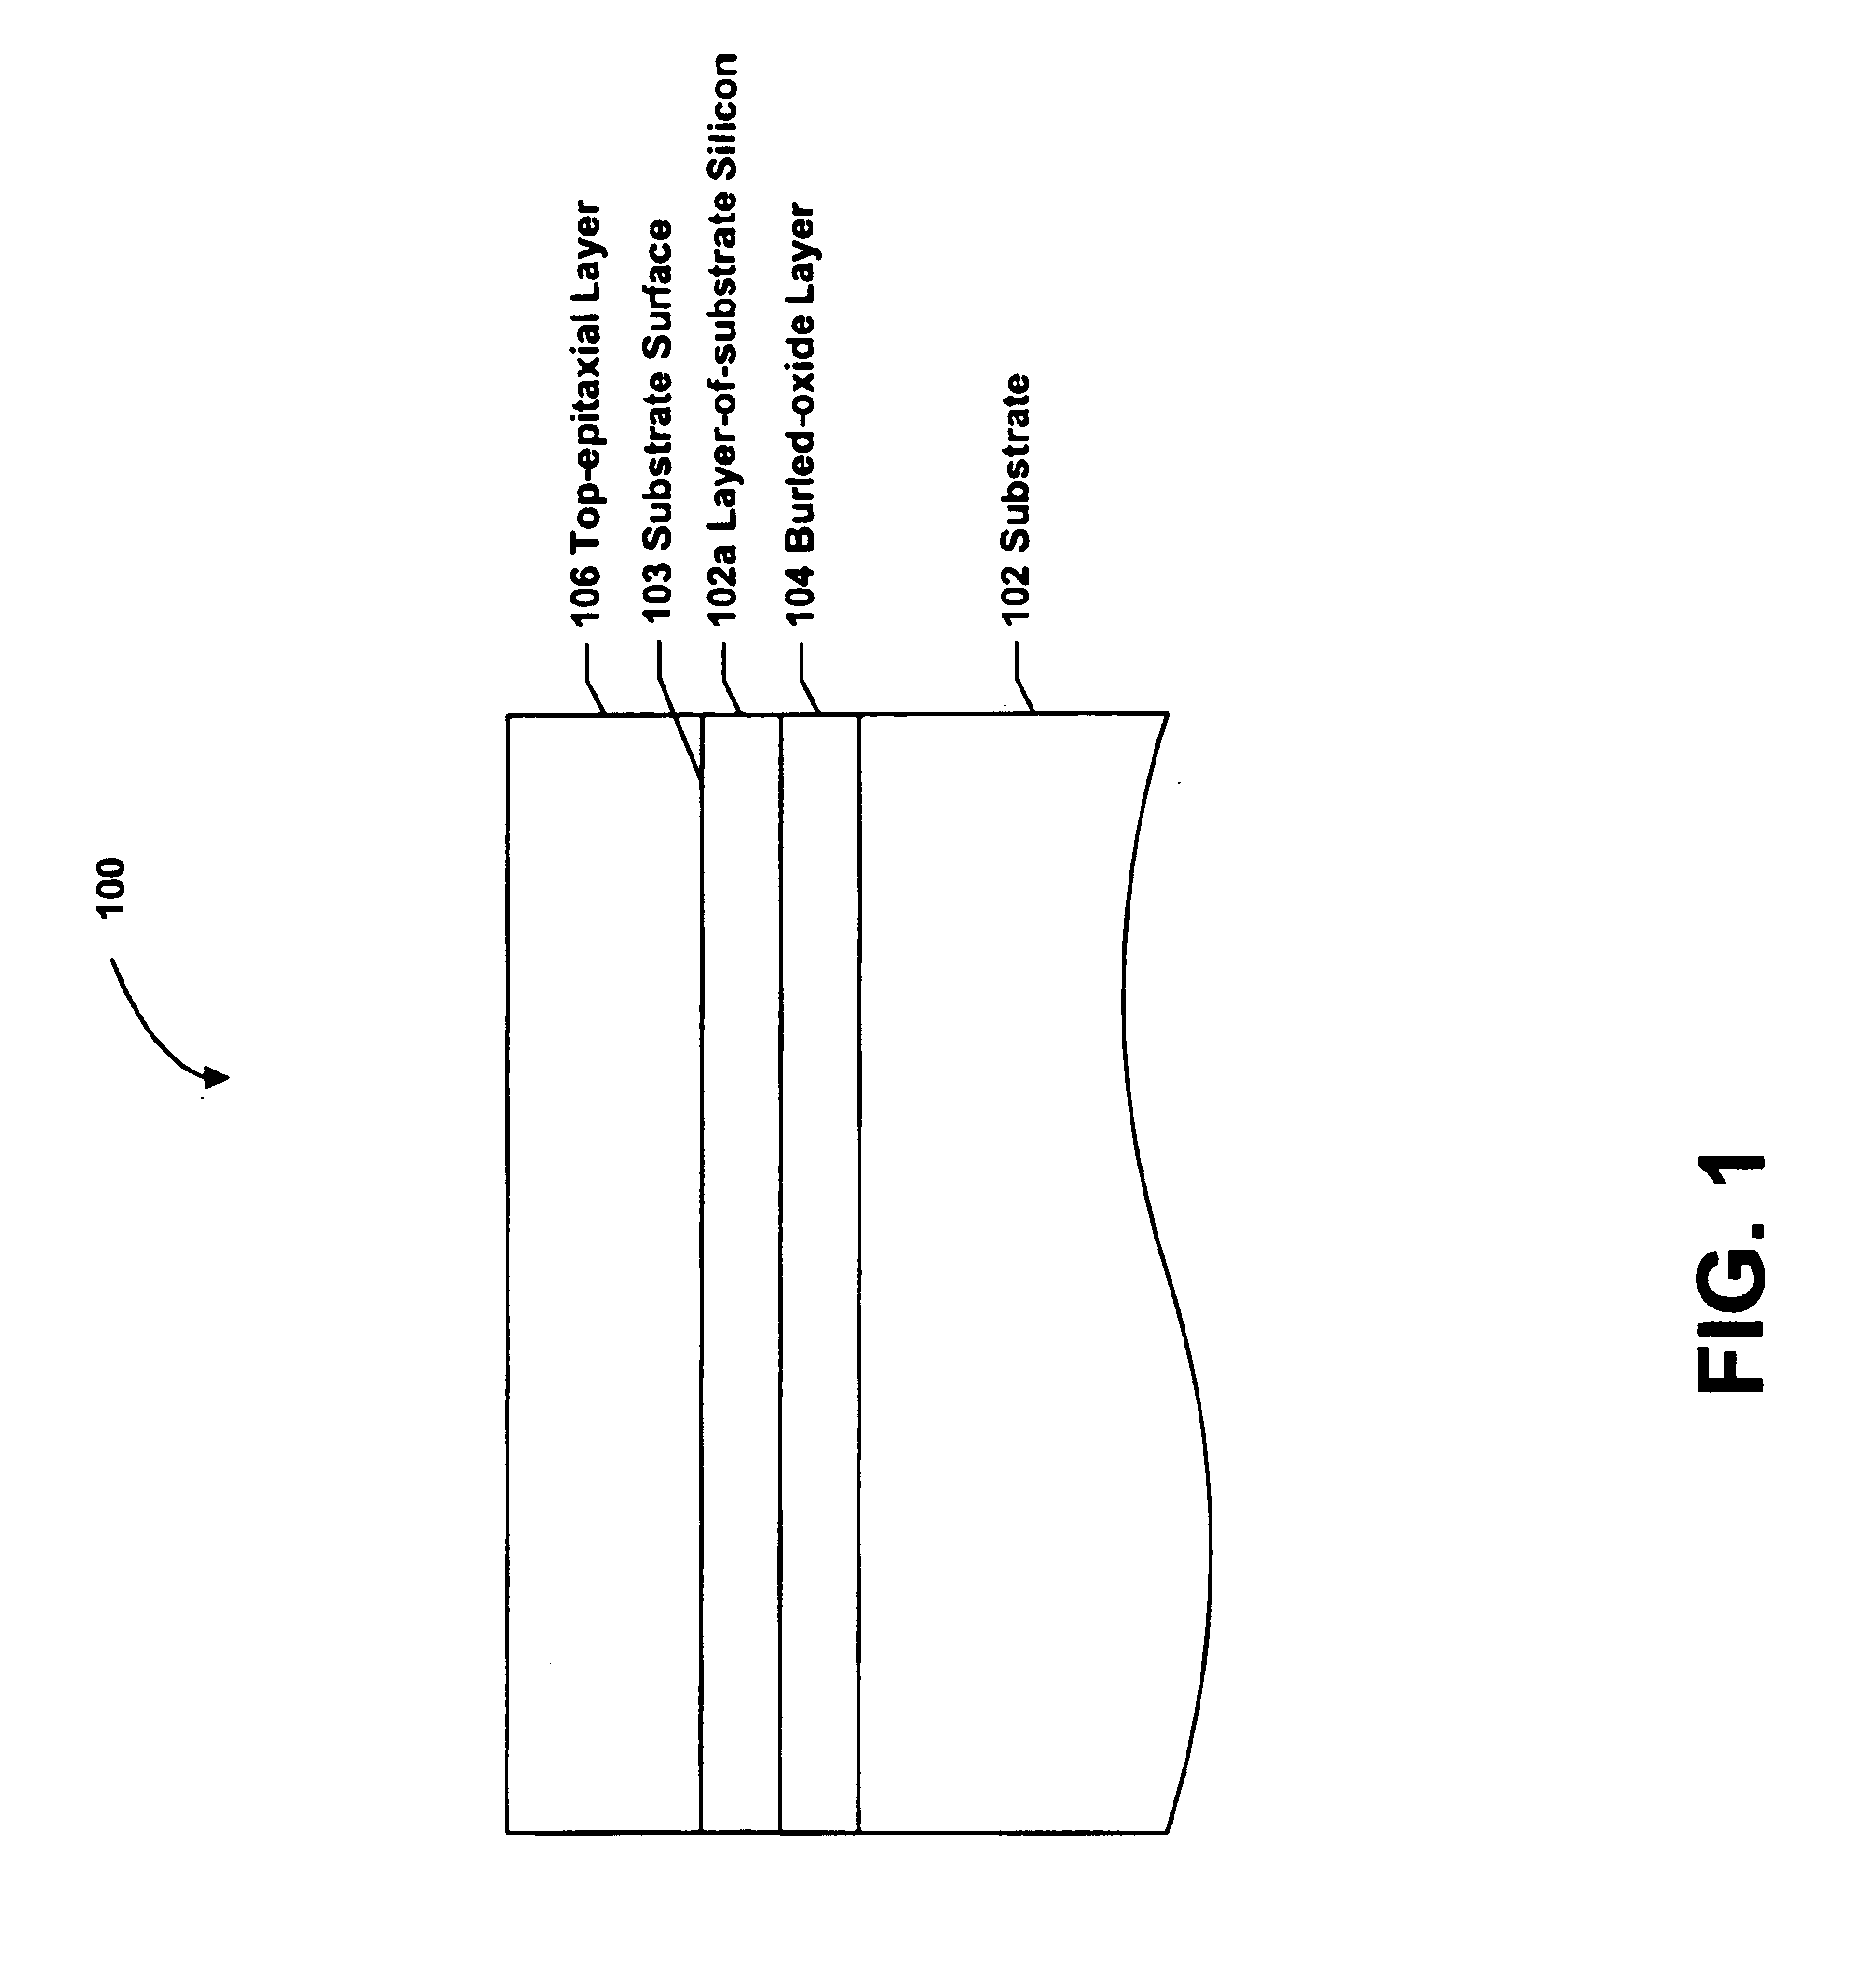 Microelectromechanical device with integrated conductive shield